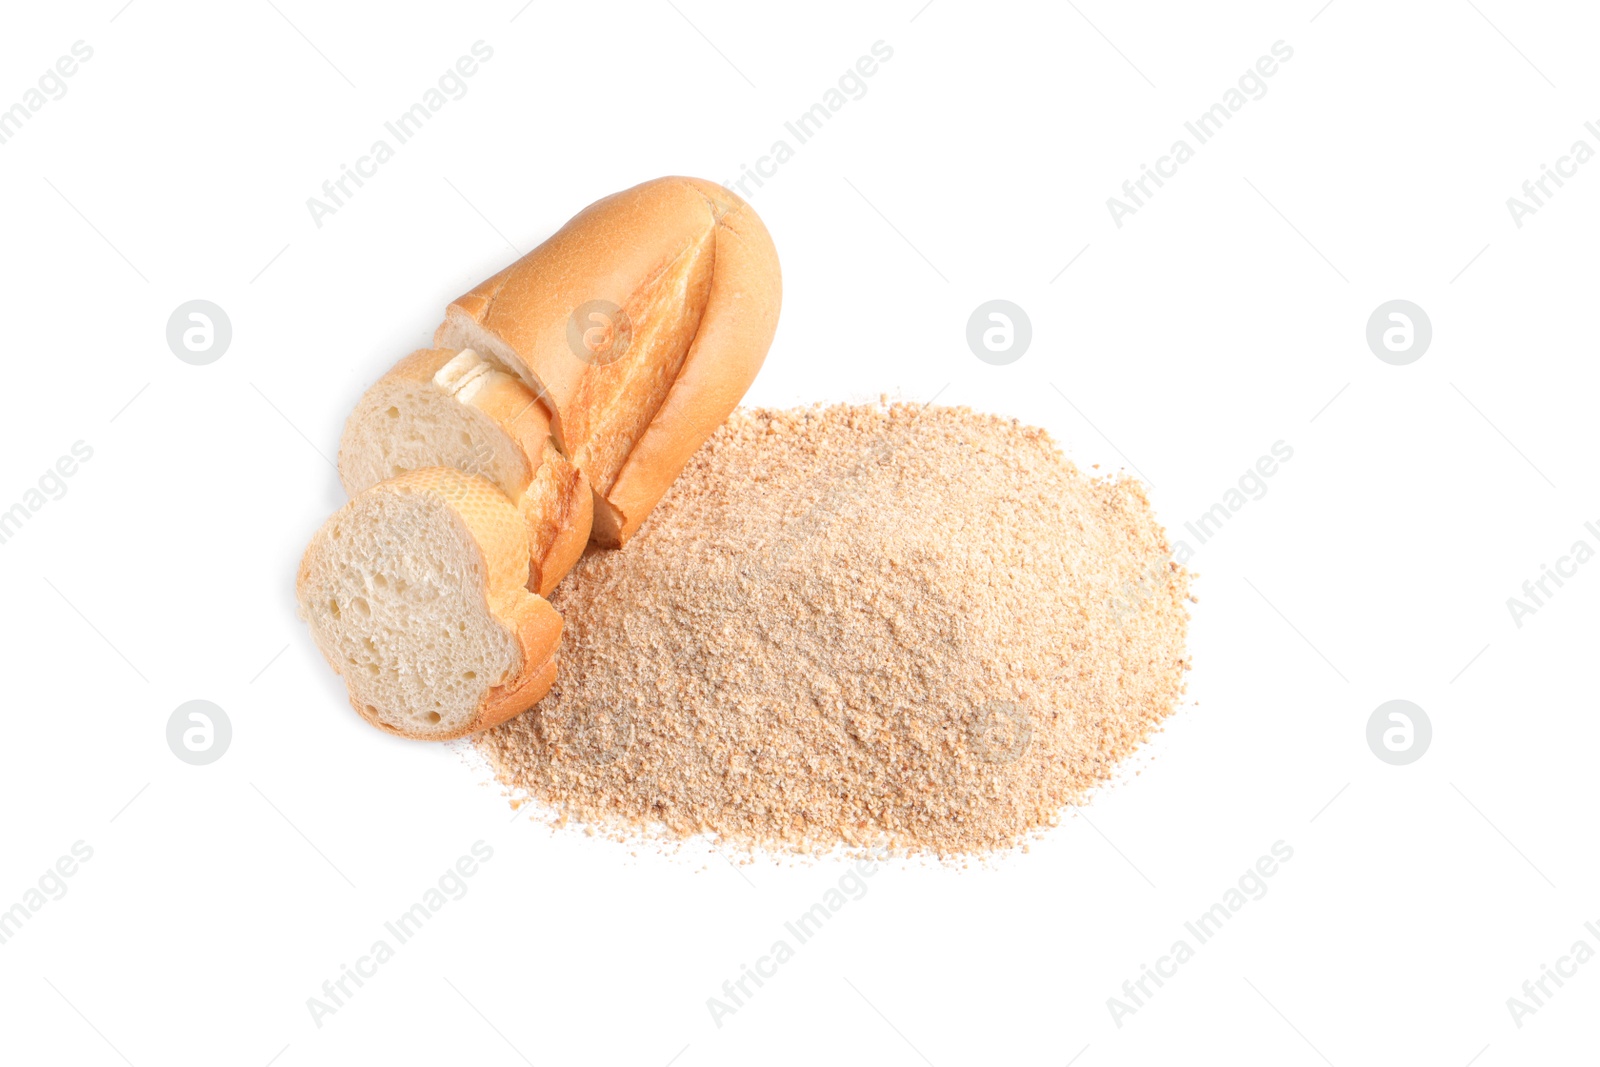 Photo of Pile of fresh bread crumbs and sliced loaf on white background, above view